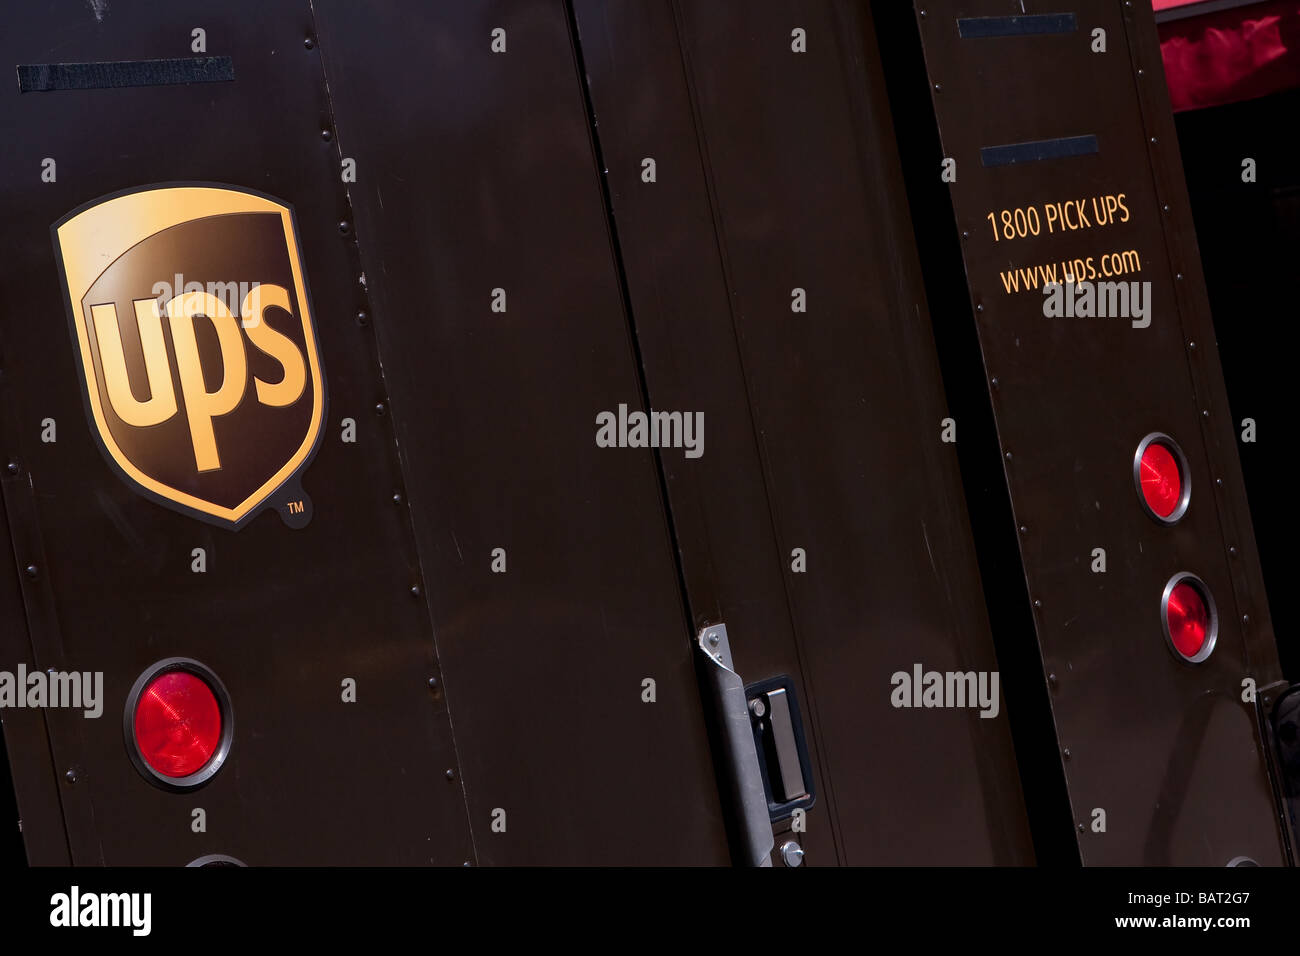 UPS logo is seen on a delivery truck Stock Photo